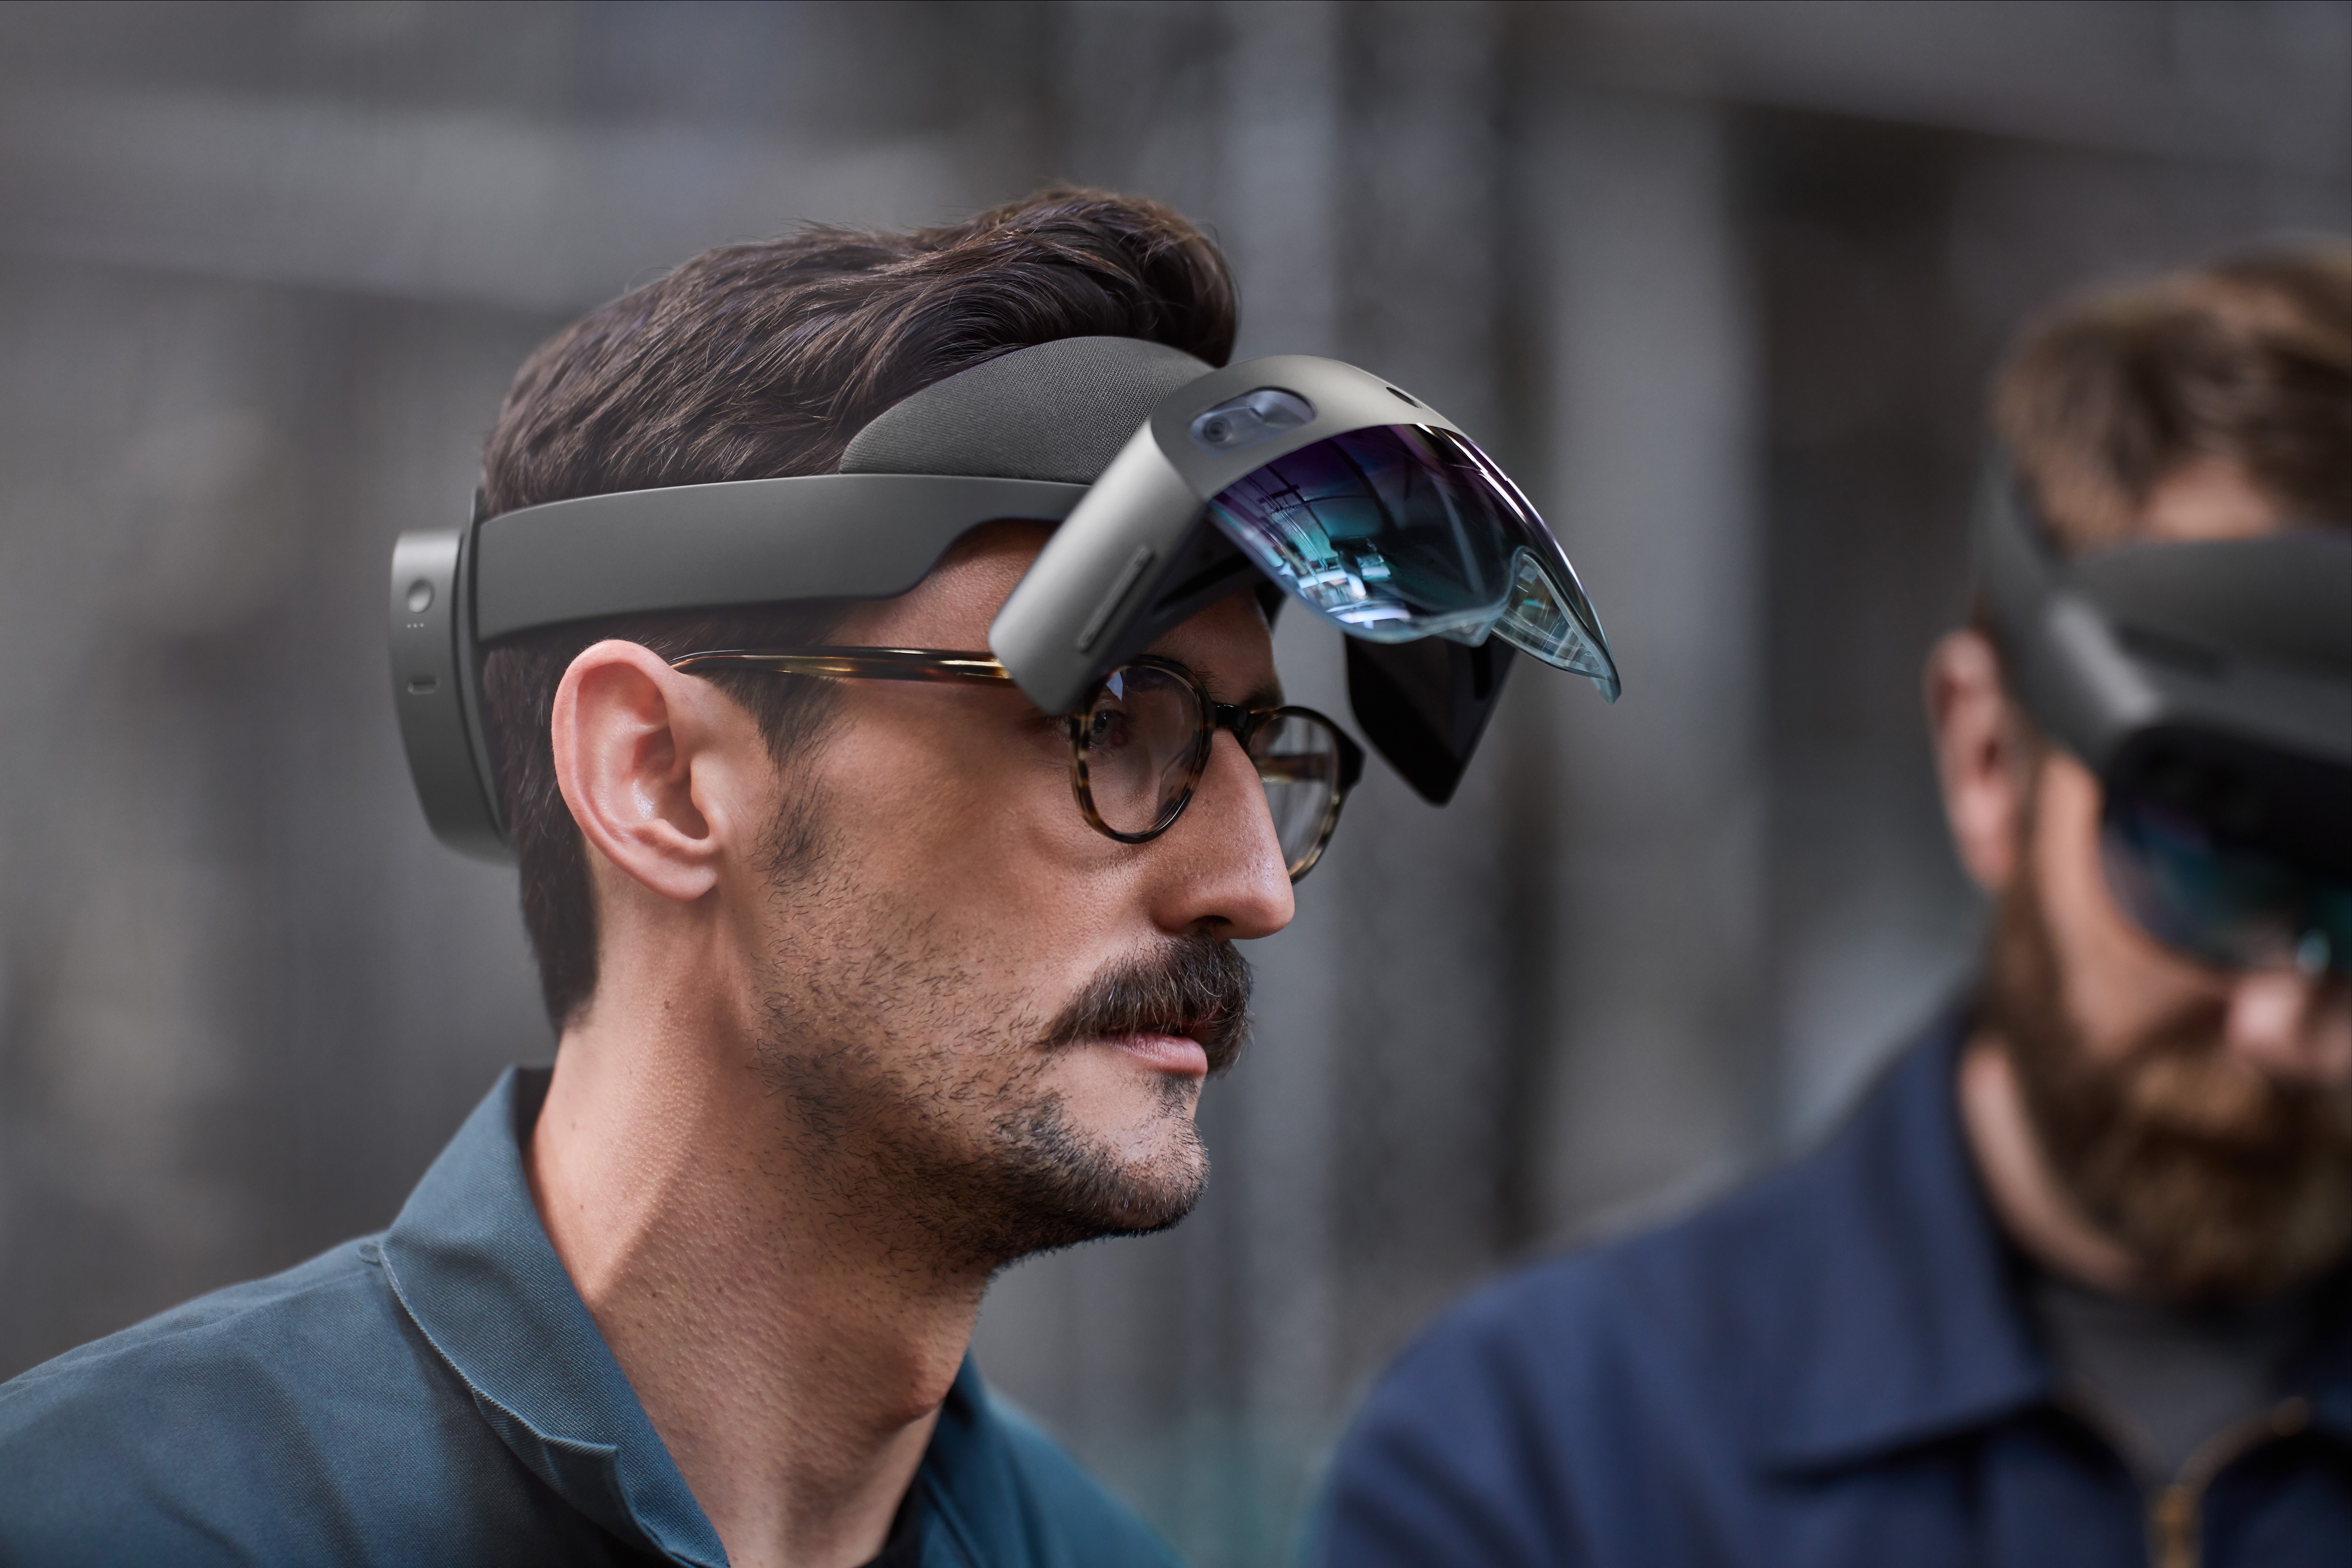 Bosch Augmented Reality applications now also work with the new Microsoft HoloLens 2